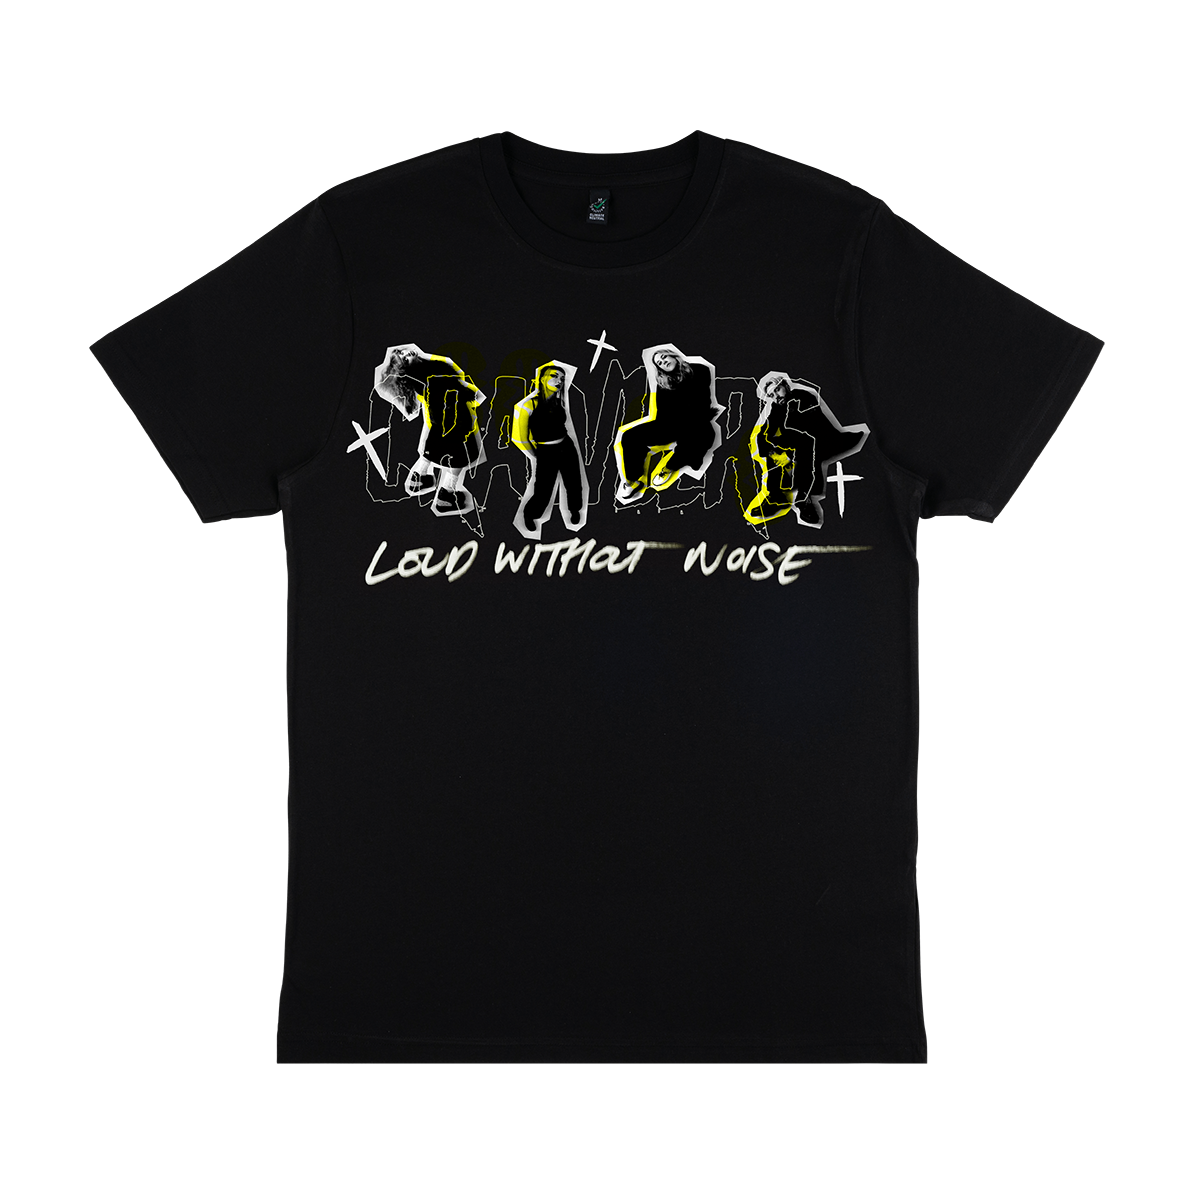 Crawlers - Black ‘loud without noise’ graphic print t-shirt